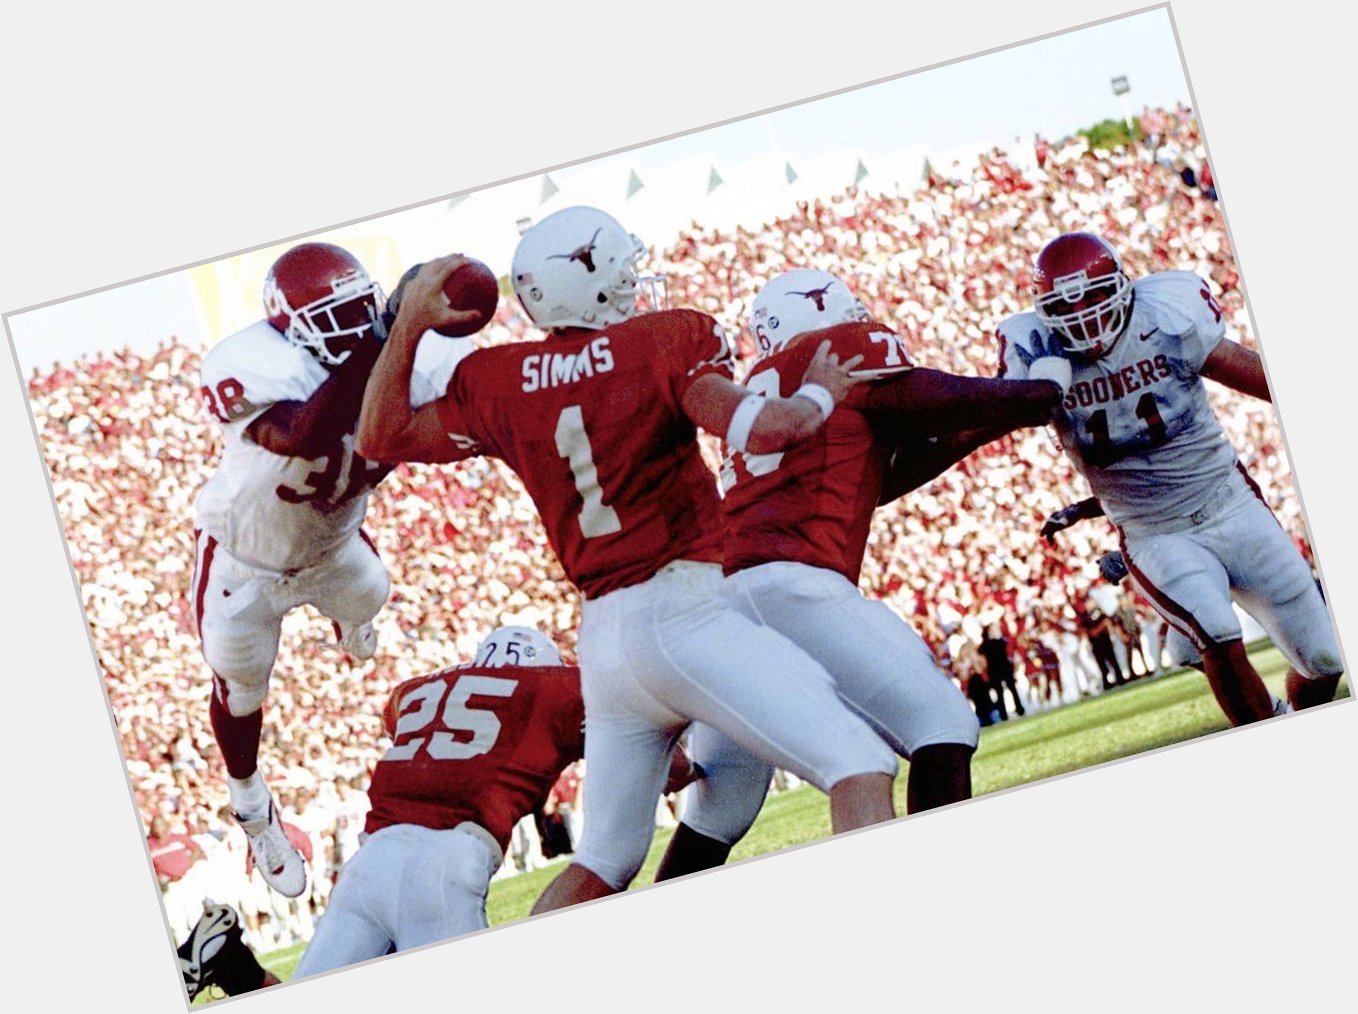 Happy birthday to Oklahoma and Cowboys legend Roy Williams! 

still one of the greatest plays in CFB history! 